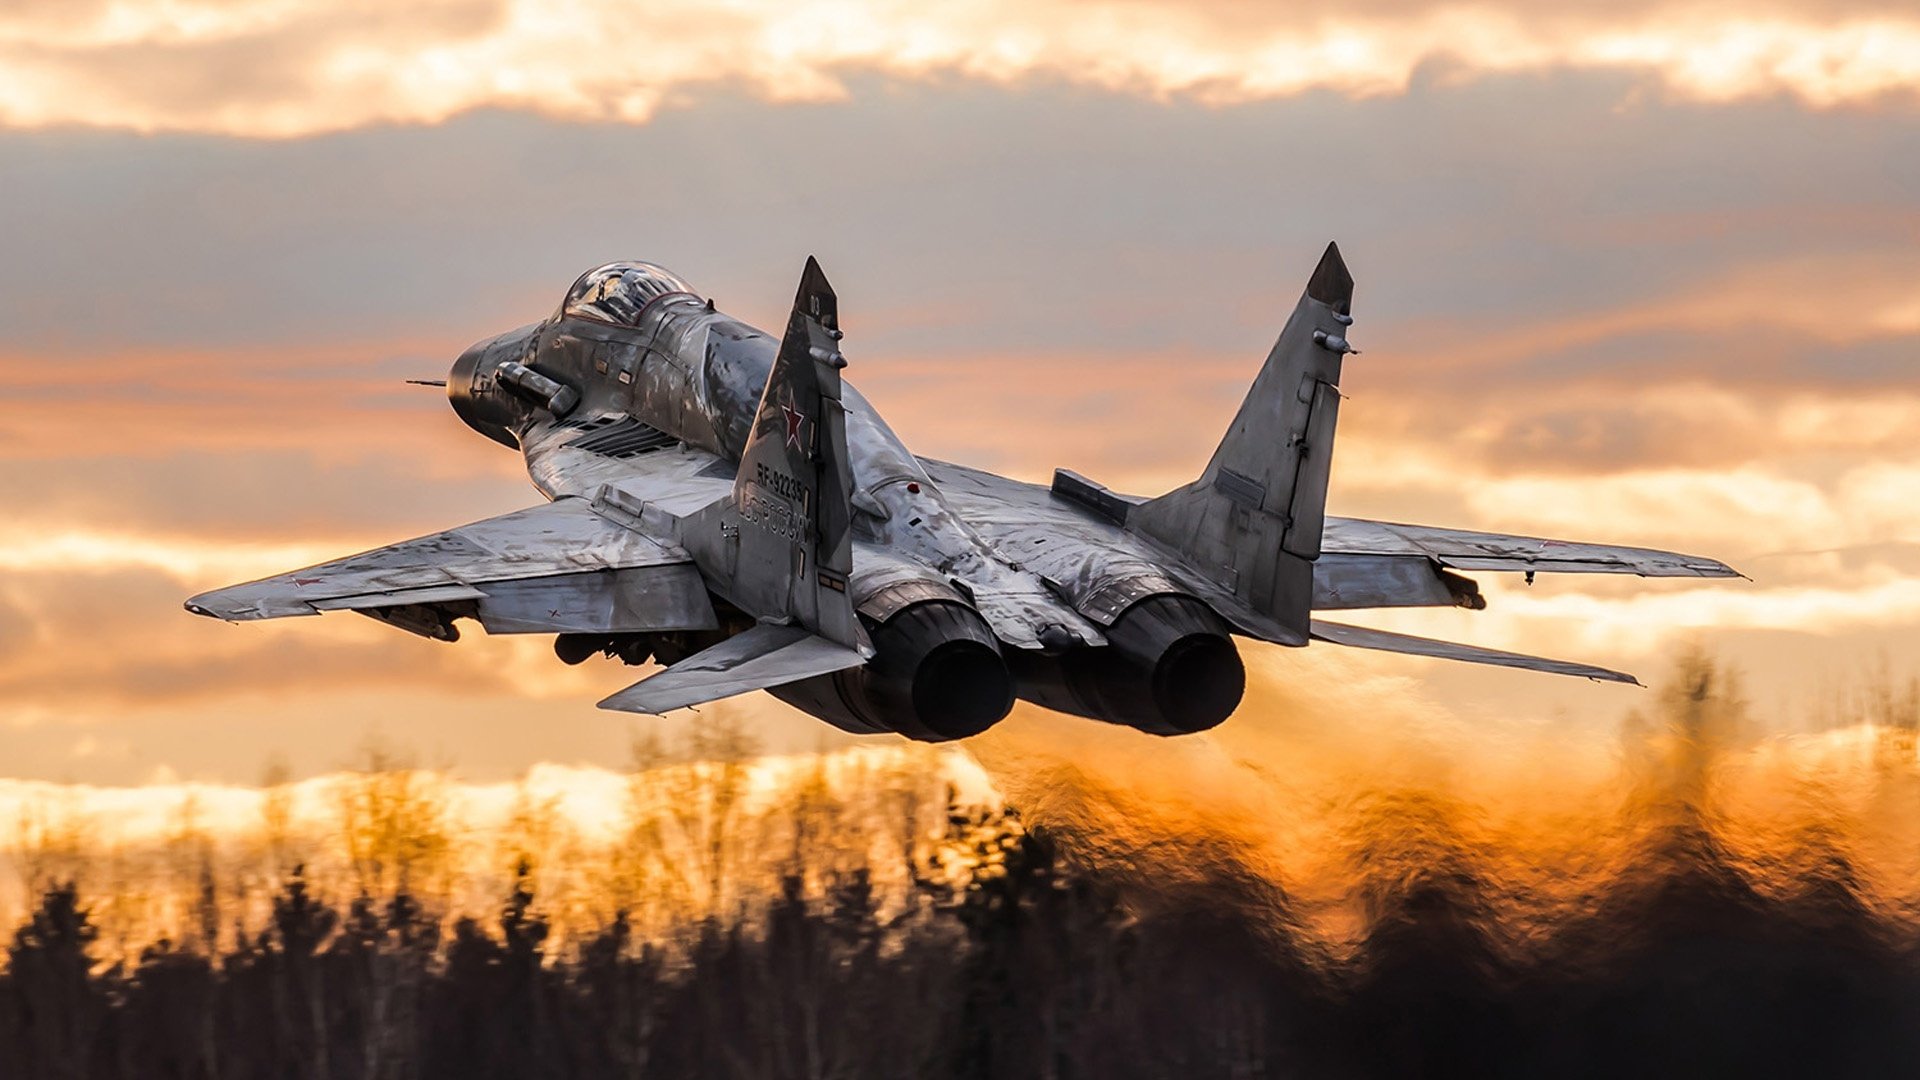 Mikoyan MiG 29 Jet Fighter Aircraft Wallpapers   MilitaryLeak 1920x1080